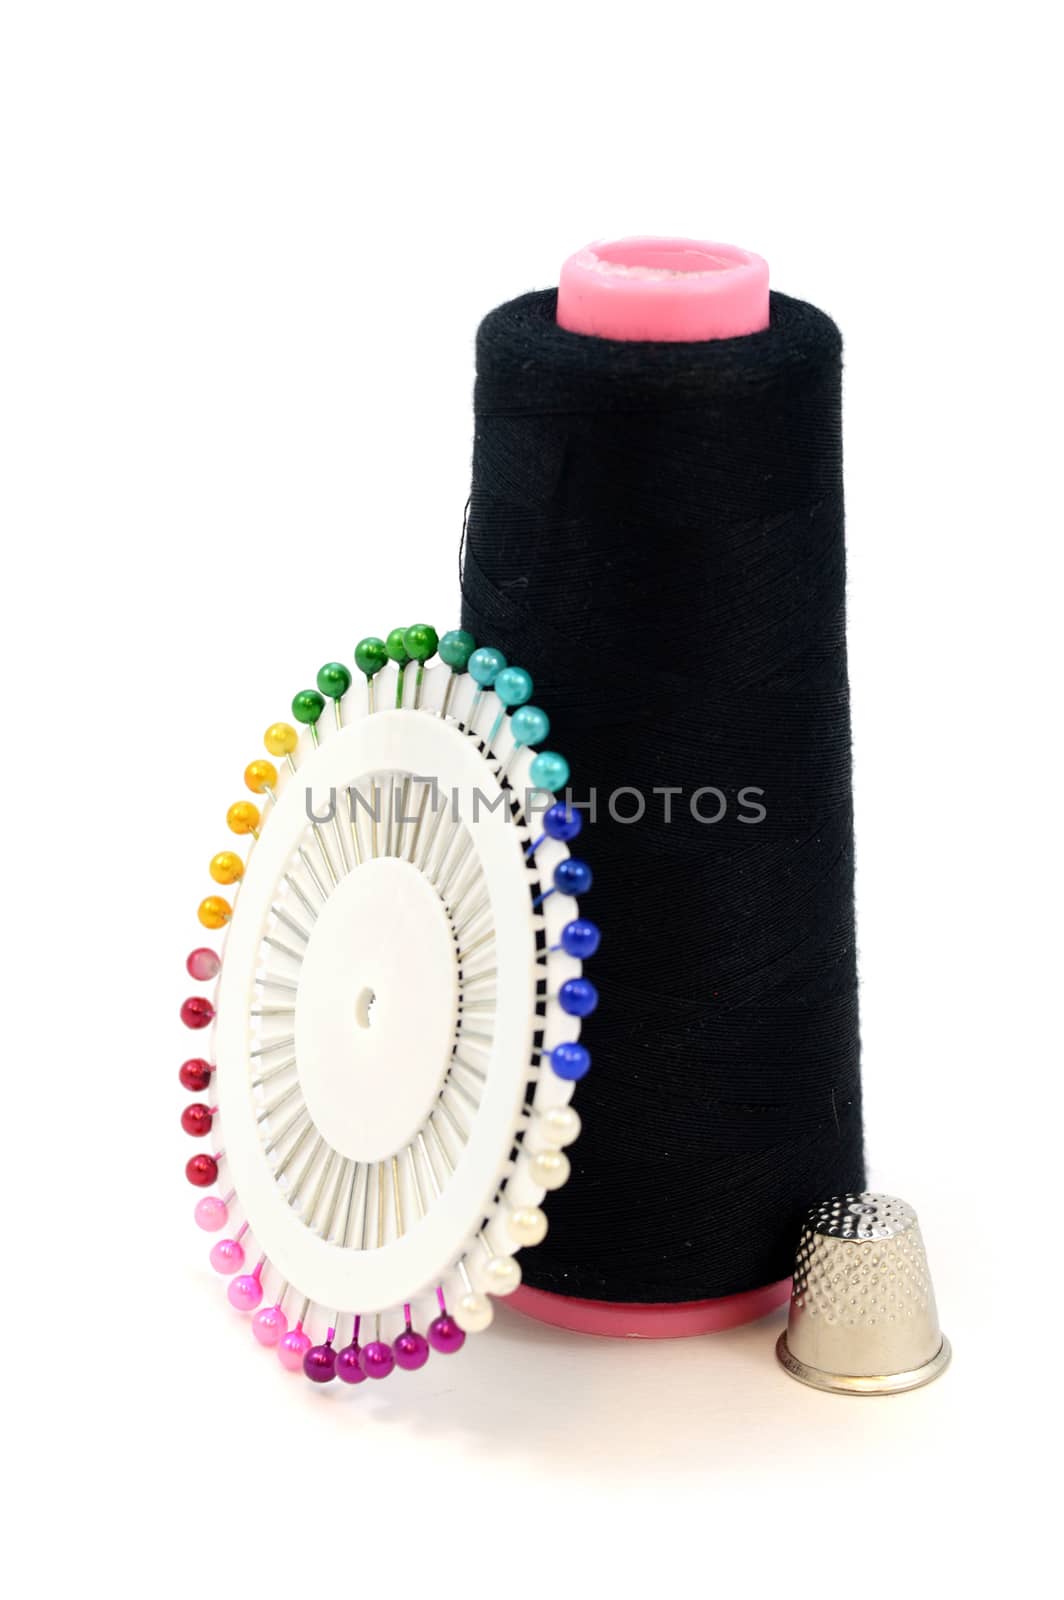 An isolated still-life of sewing objects over a white background including a spool of black thread with multicolor pins and a metal thimble.